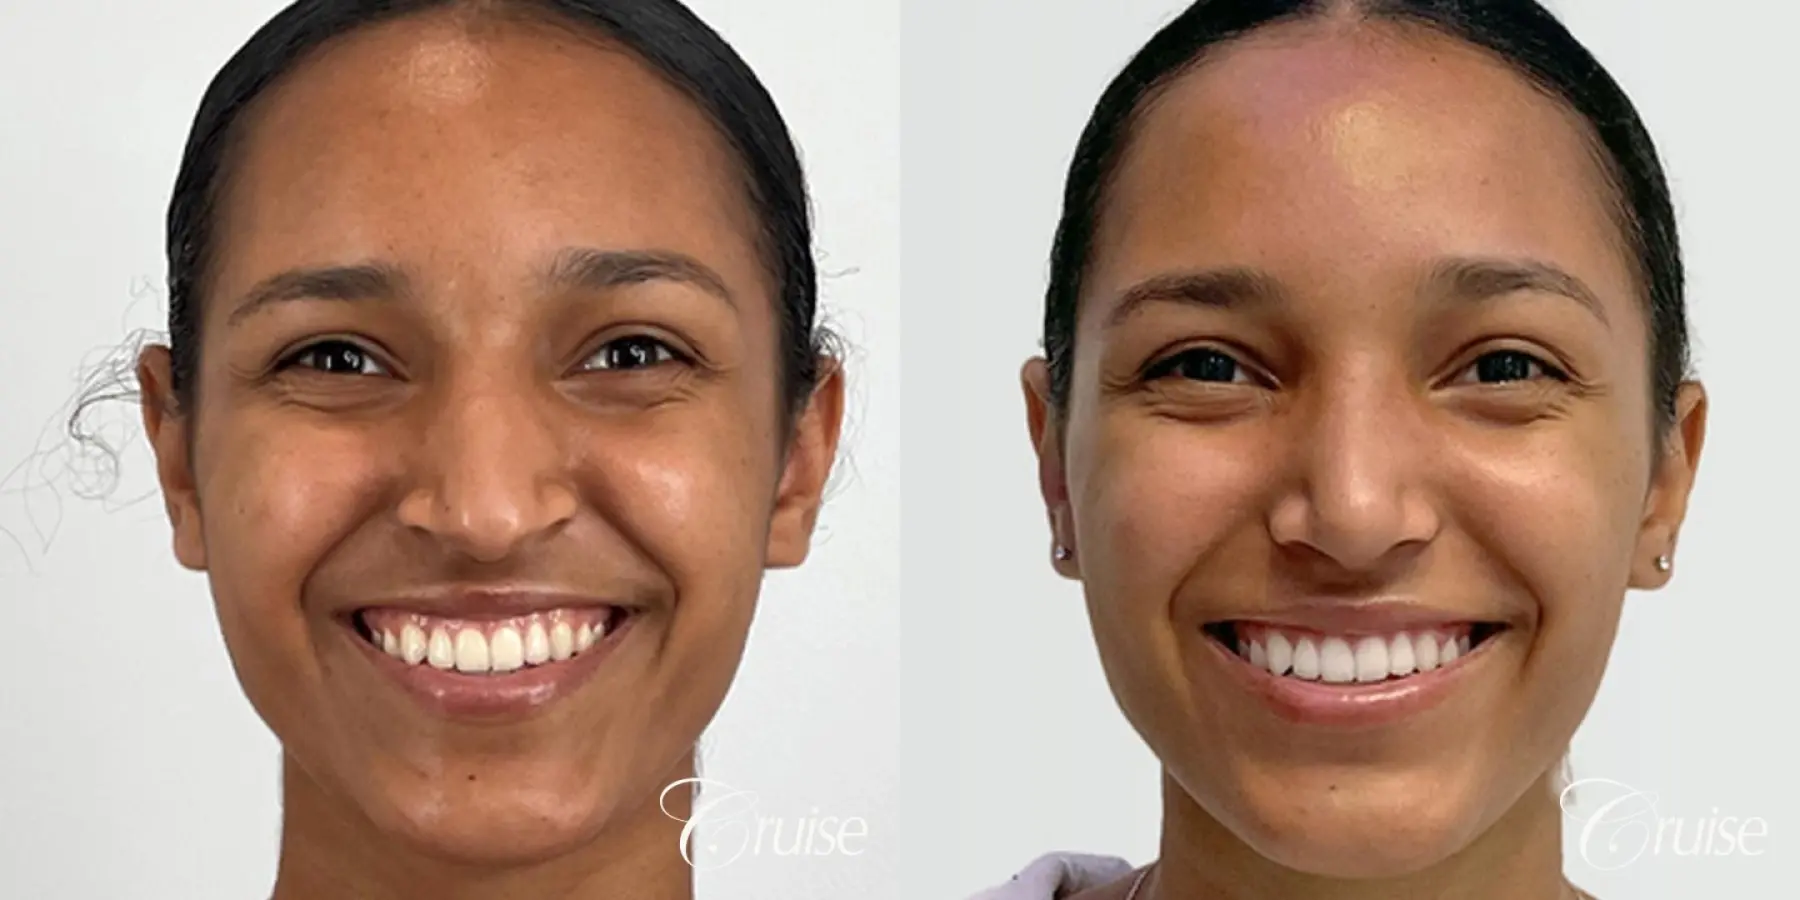 Open Ethnic Rhinoplasty - Before and After 1